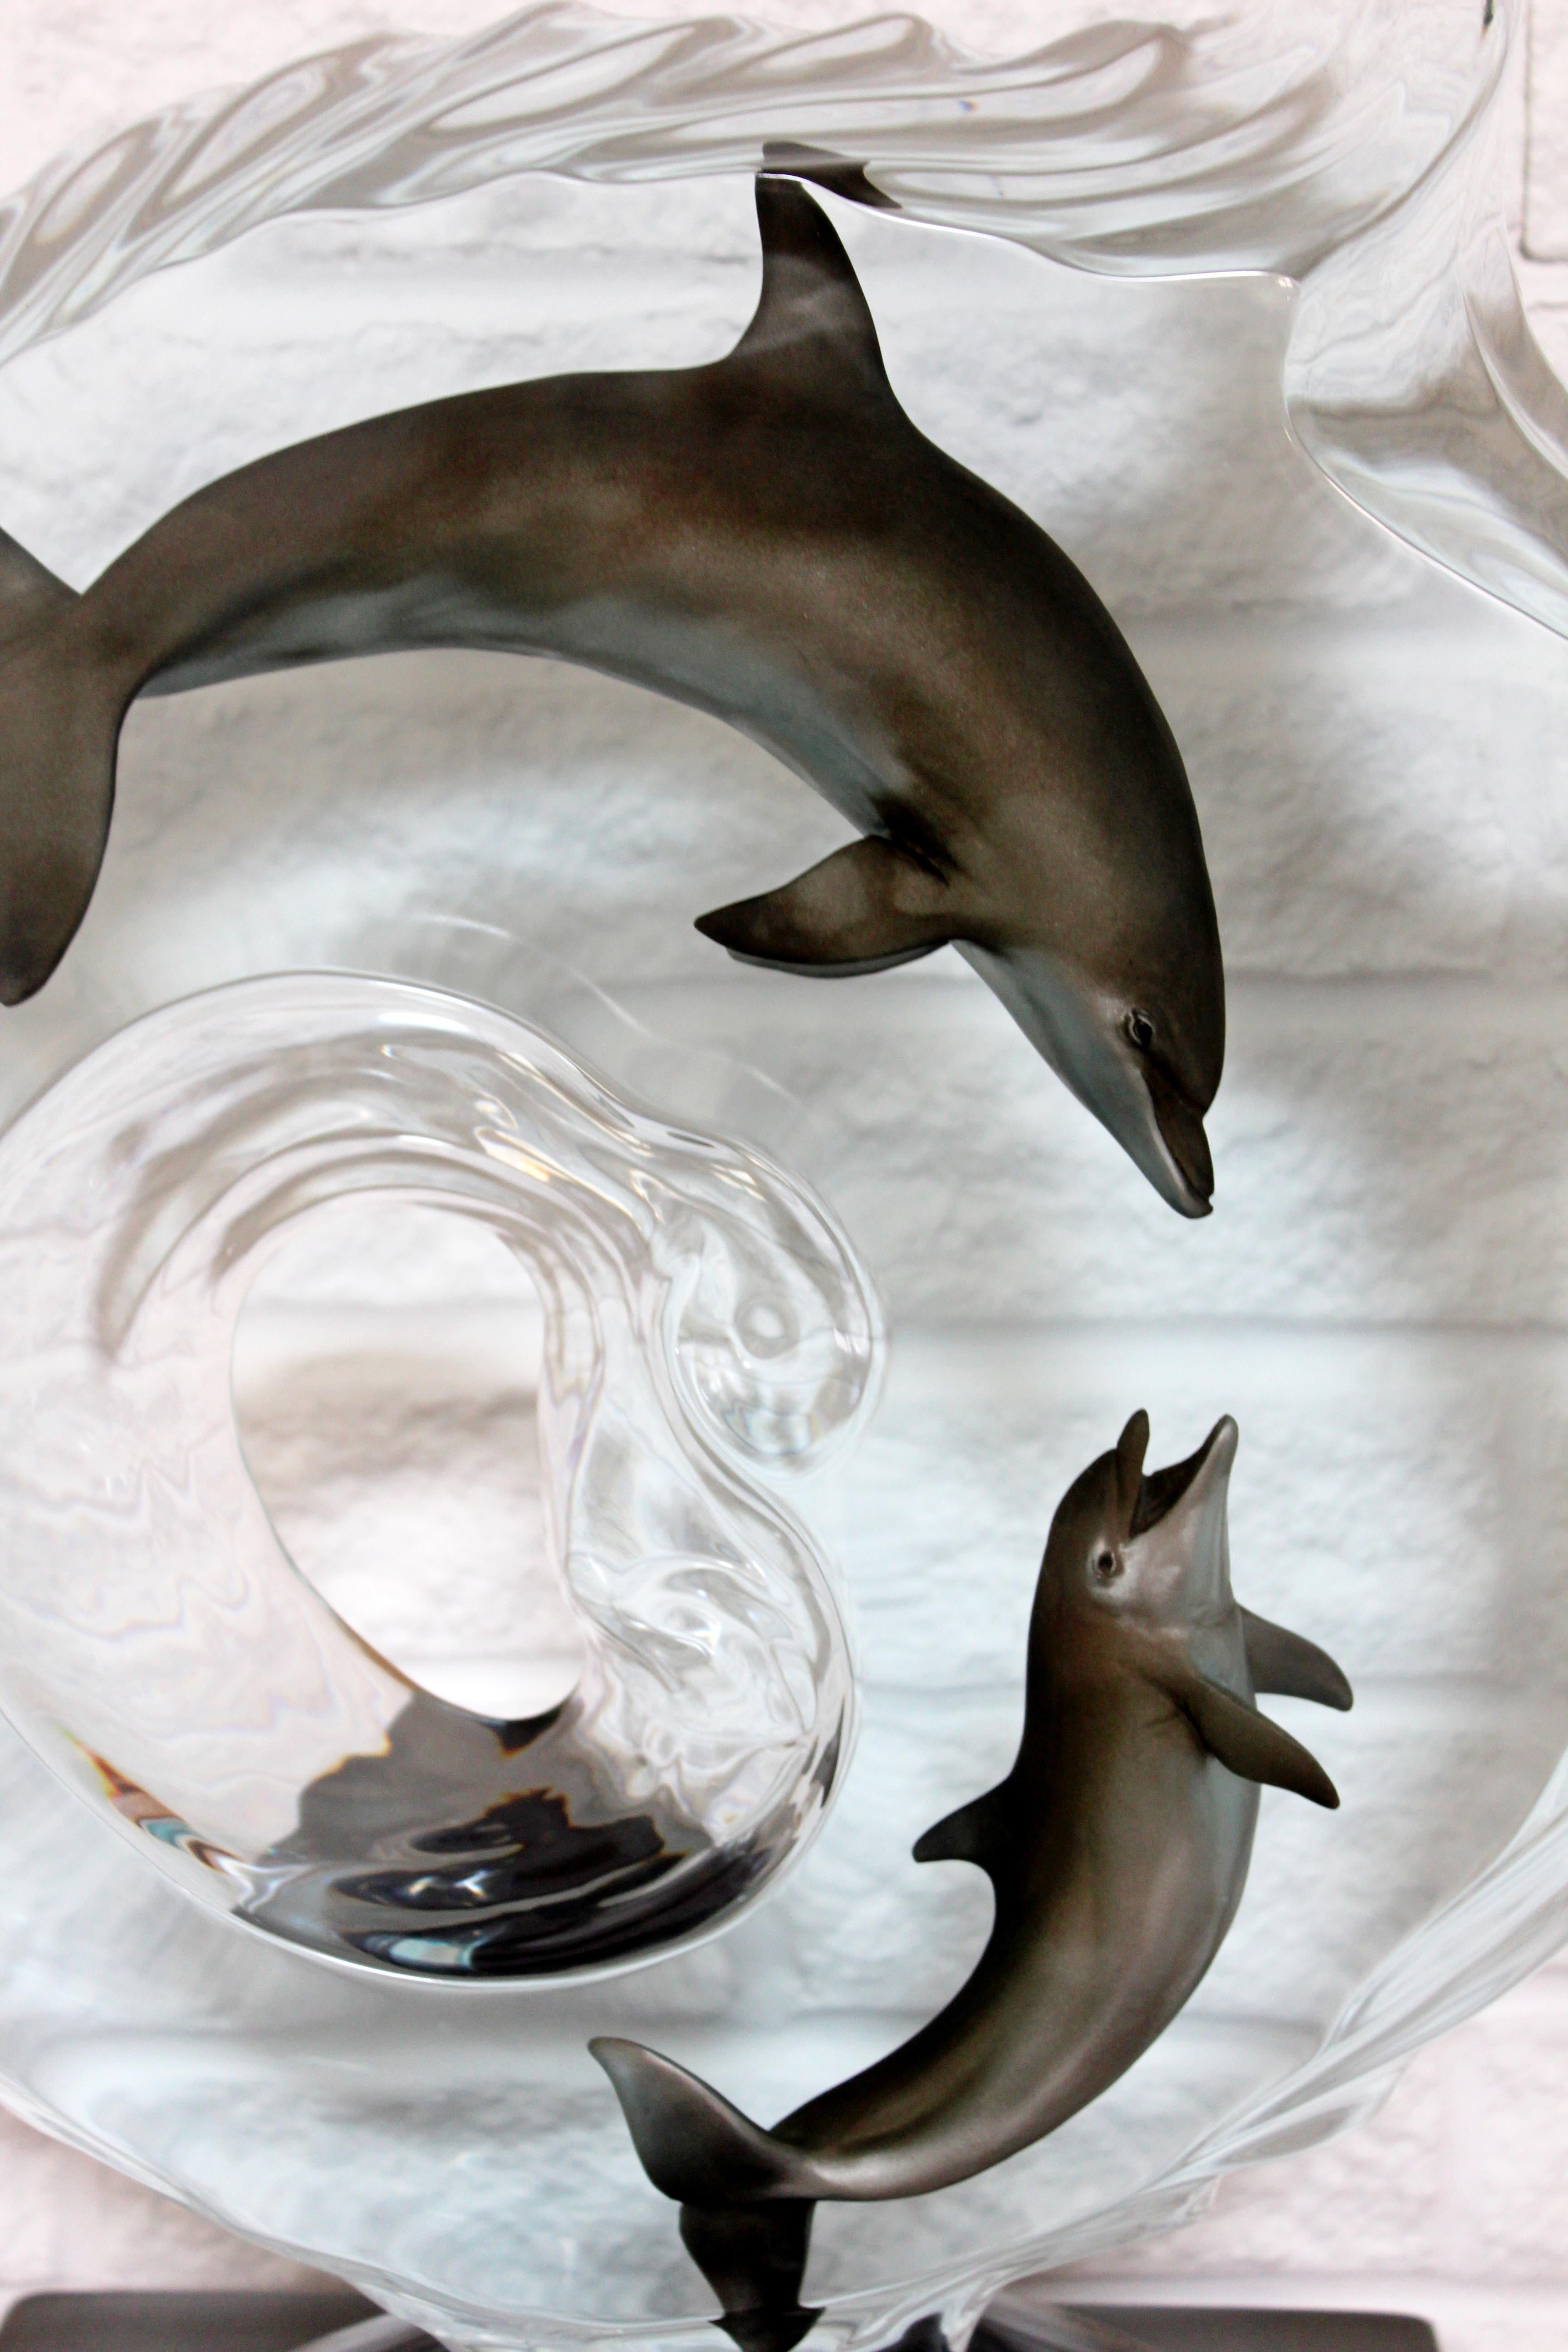 For your consideration is an a stunning, Lucite acrylic table sculpture of a couple of dolphins, signed Medina. In excellent condition. The dimensions are 18